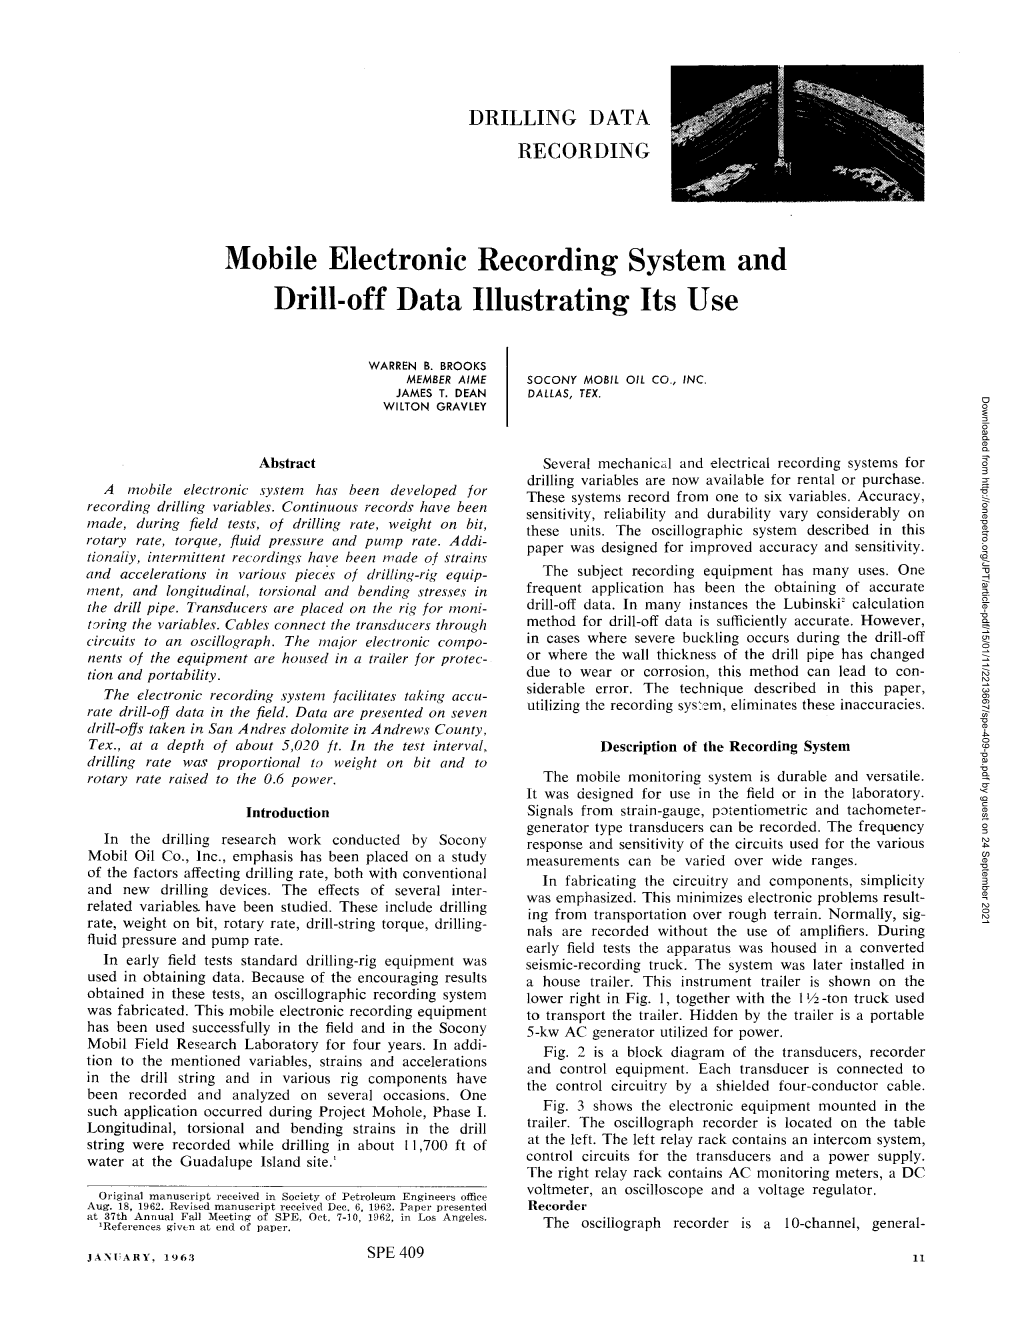 Mobile Electronic Recording System and Drill-Off Data Illustrating Its Use